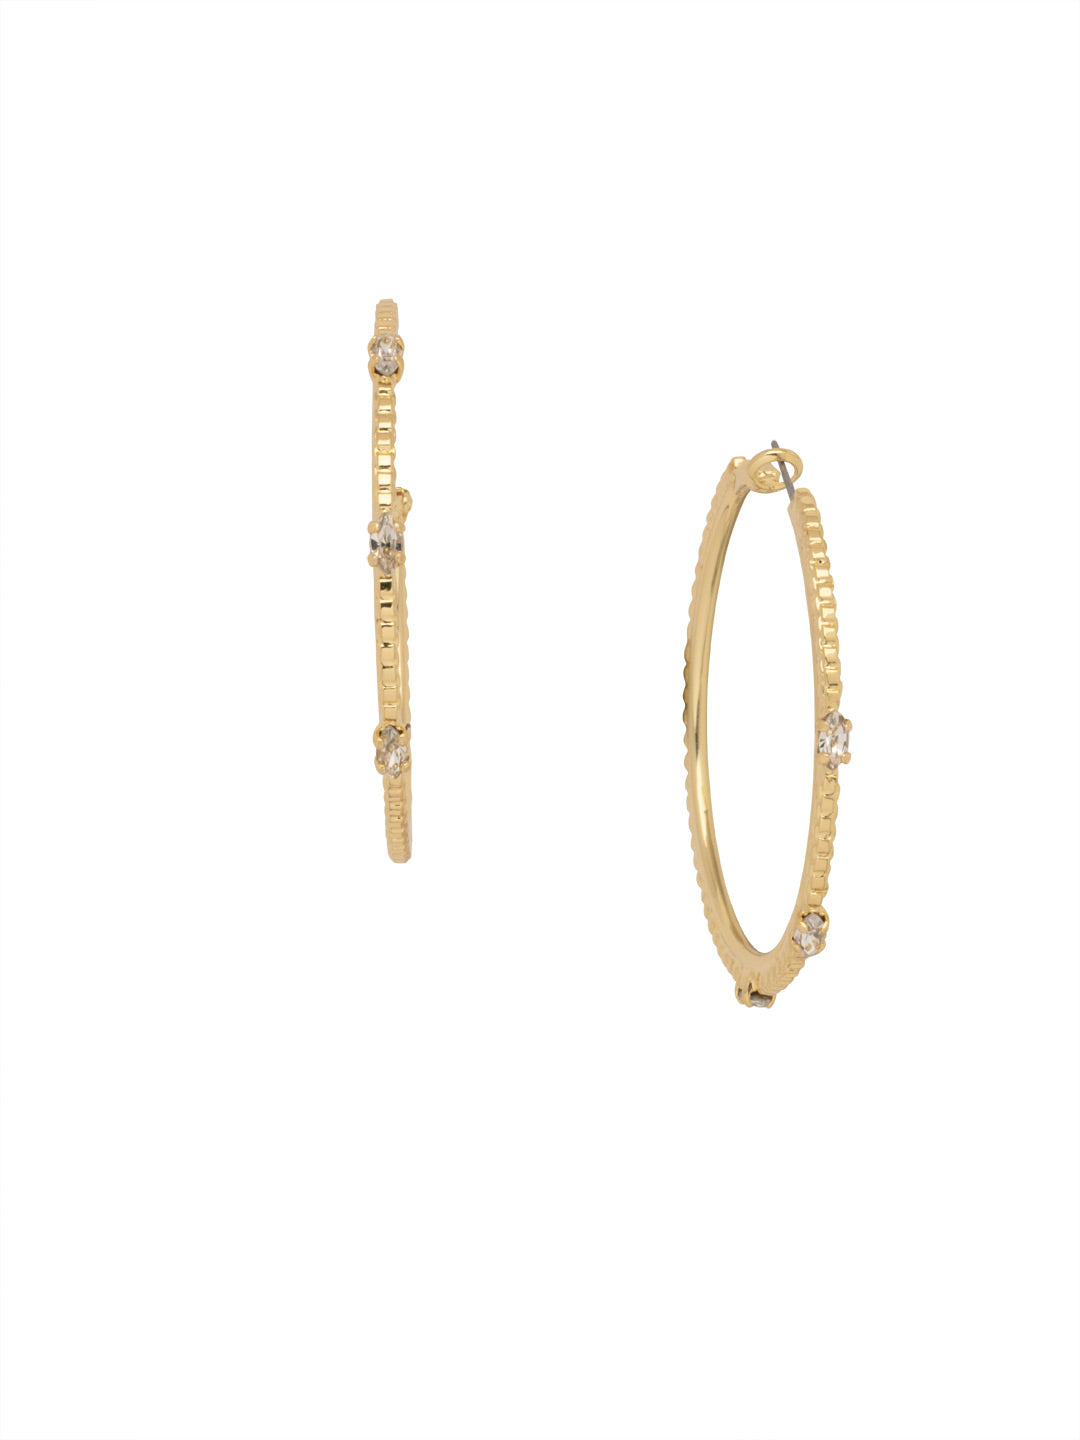 Ellie Hoop Earrings - 8EA7BGCRY - <p>The Ellie Hoop Earrings feature a row of crystals on a classic metal hoop. From Sorrelli's Crystal collection in our Bright Gold-tone finish.</p>